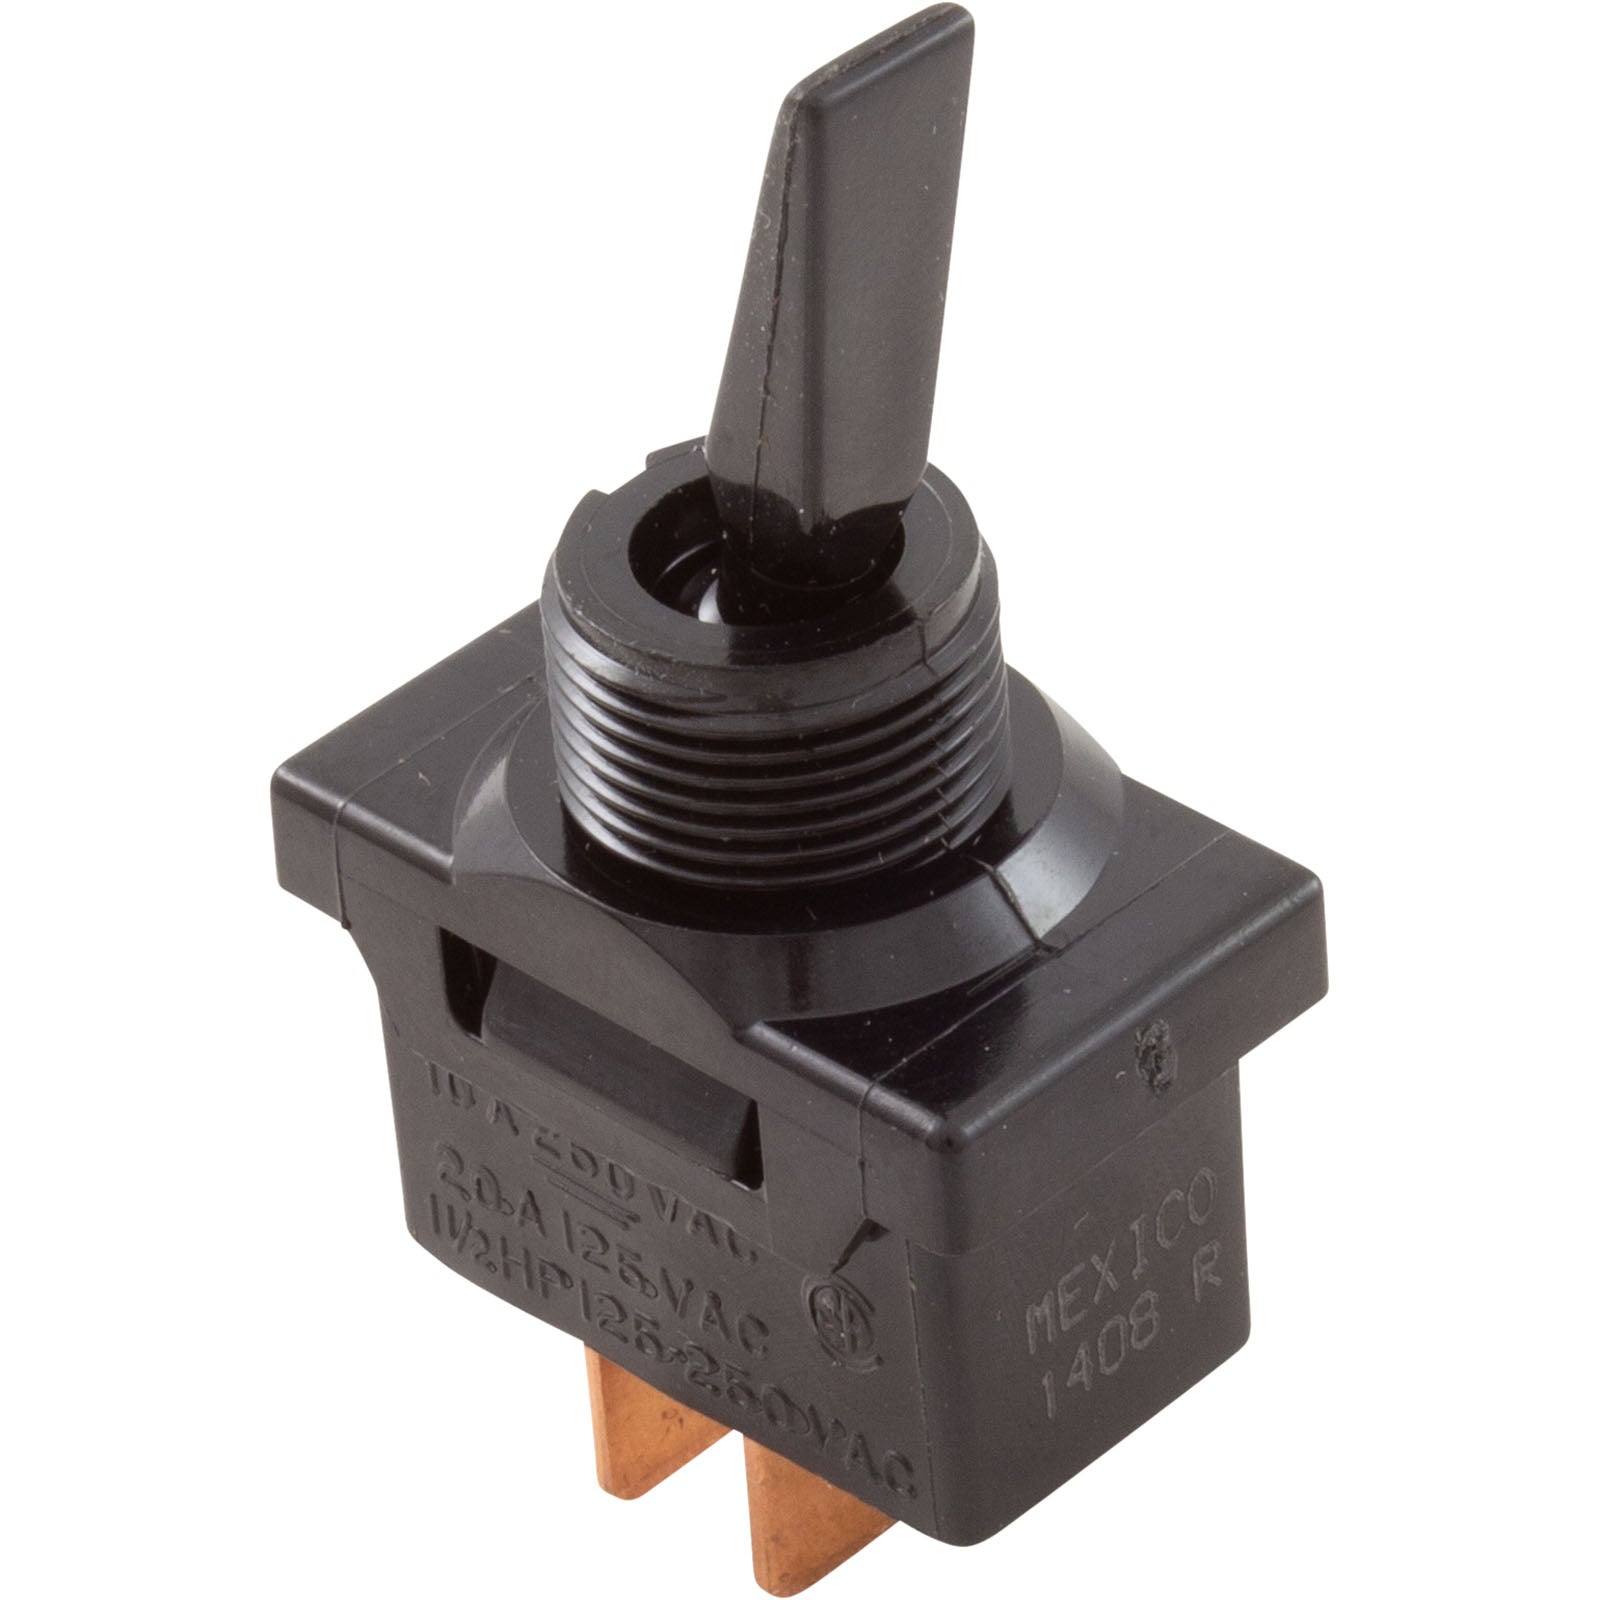 Toggle Switch, Pentair Sta-Rite J with ABG, 1 Speed/ 155187